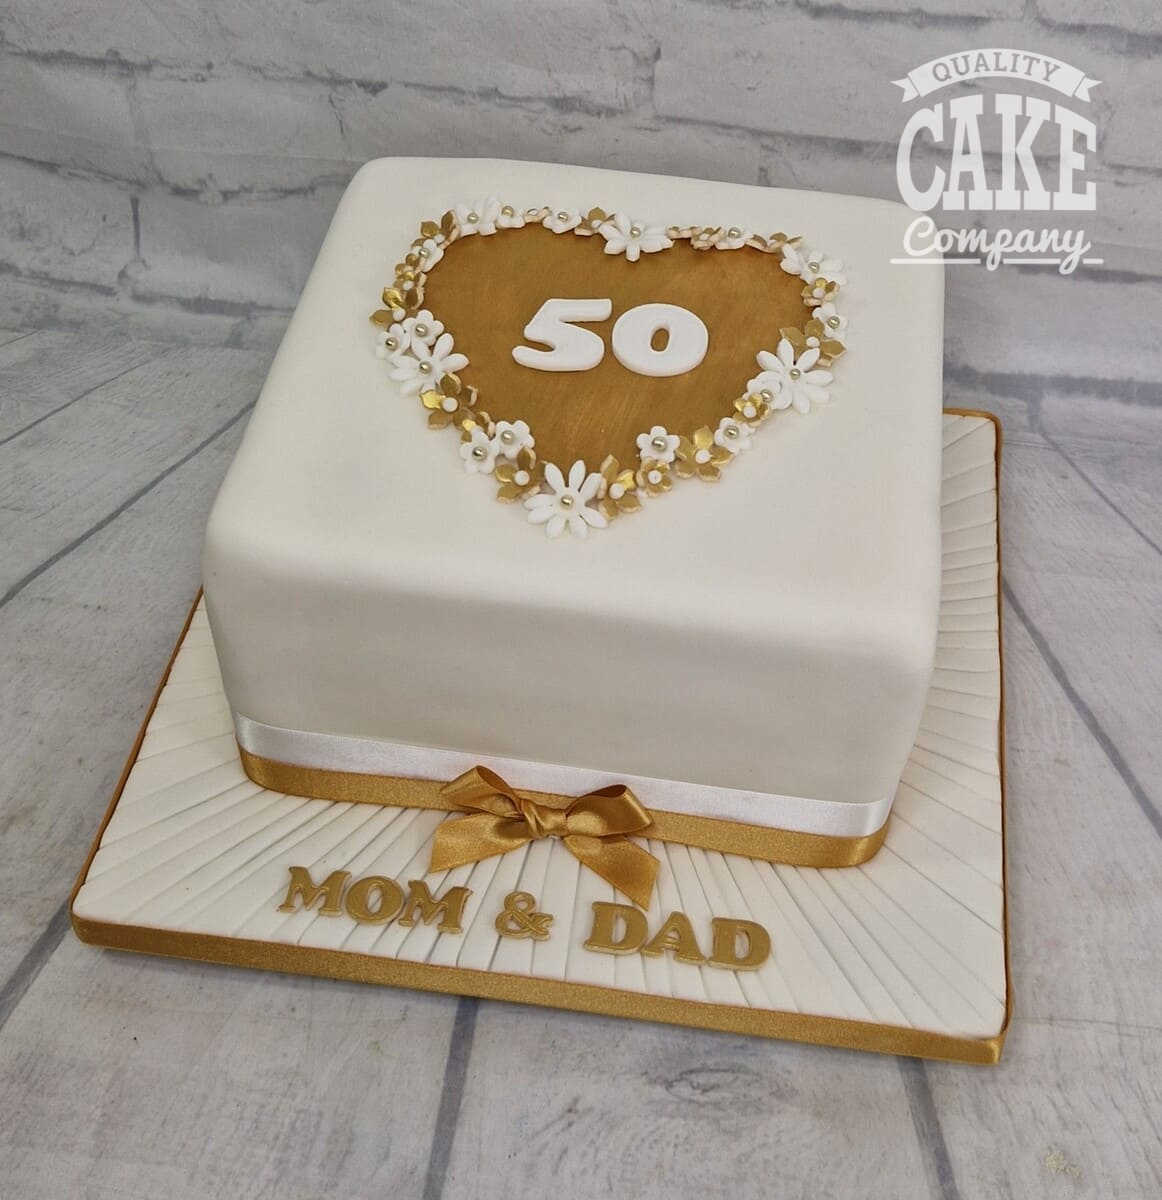 Happy Wedding Anniversary Cake with His/ Her Name | Happy anniversary cakes,  Cake name, Anniversary cake